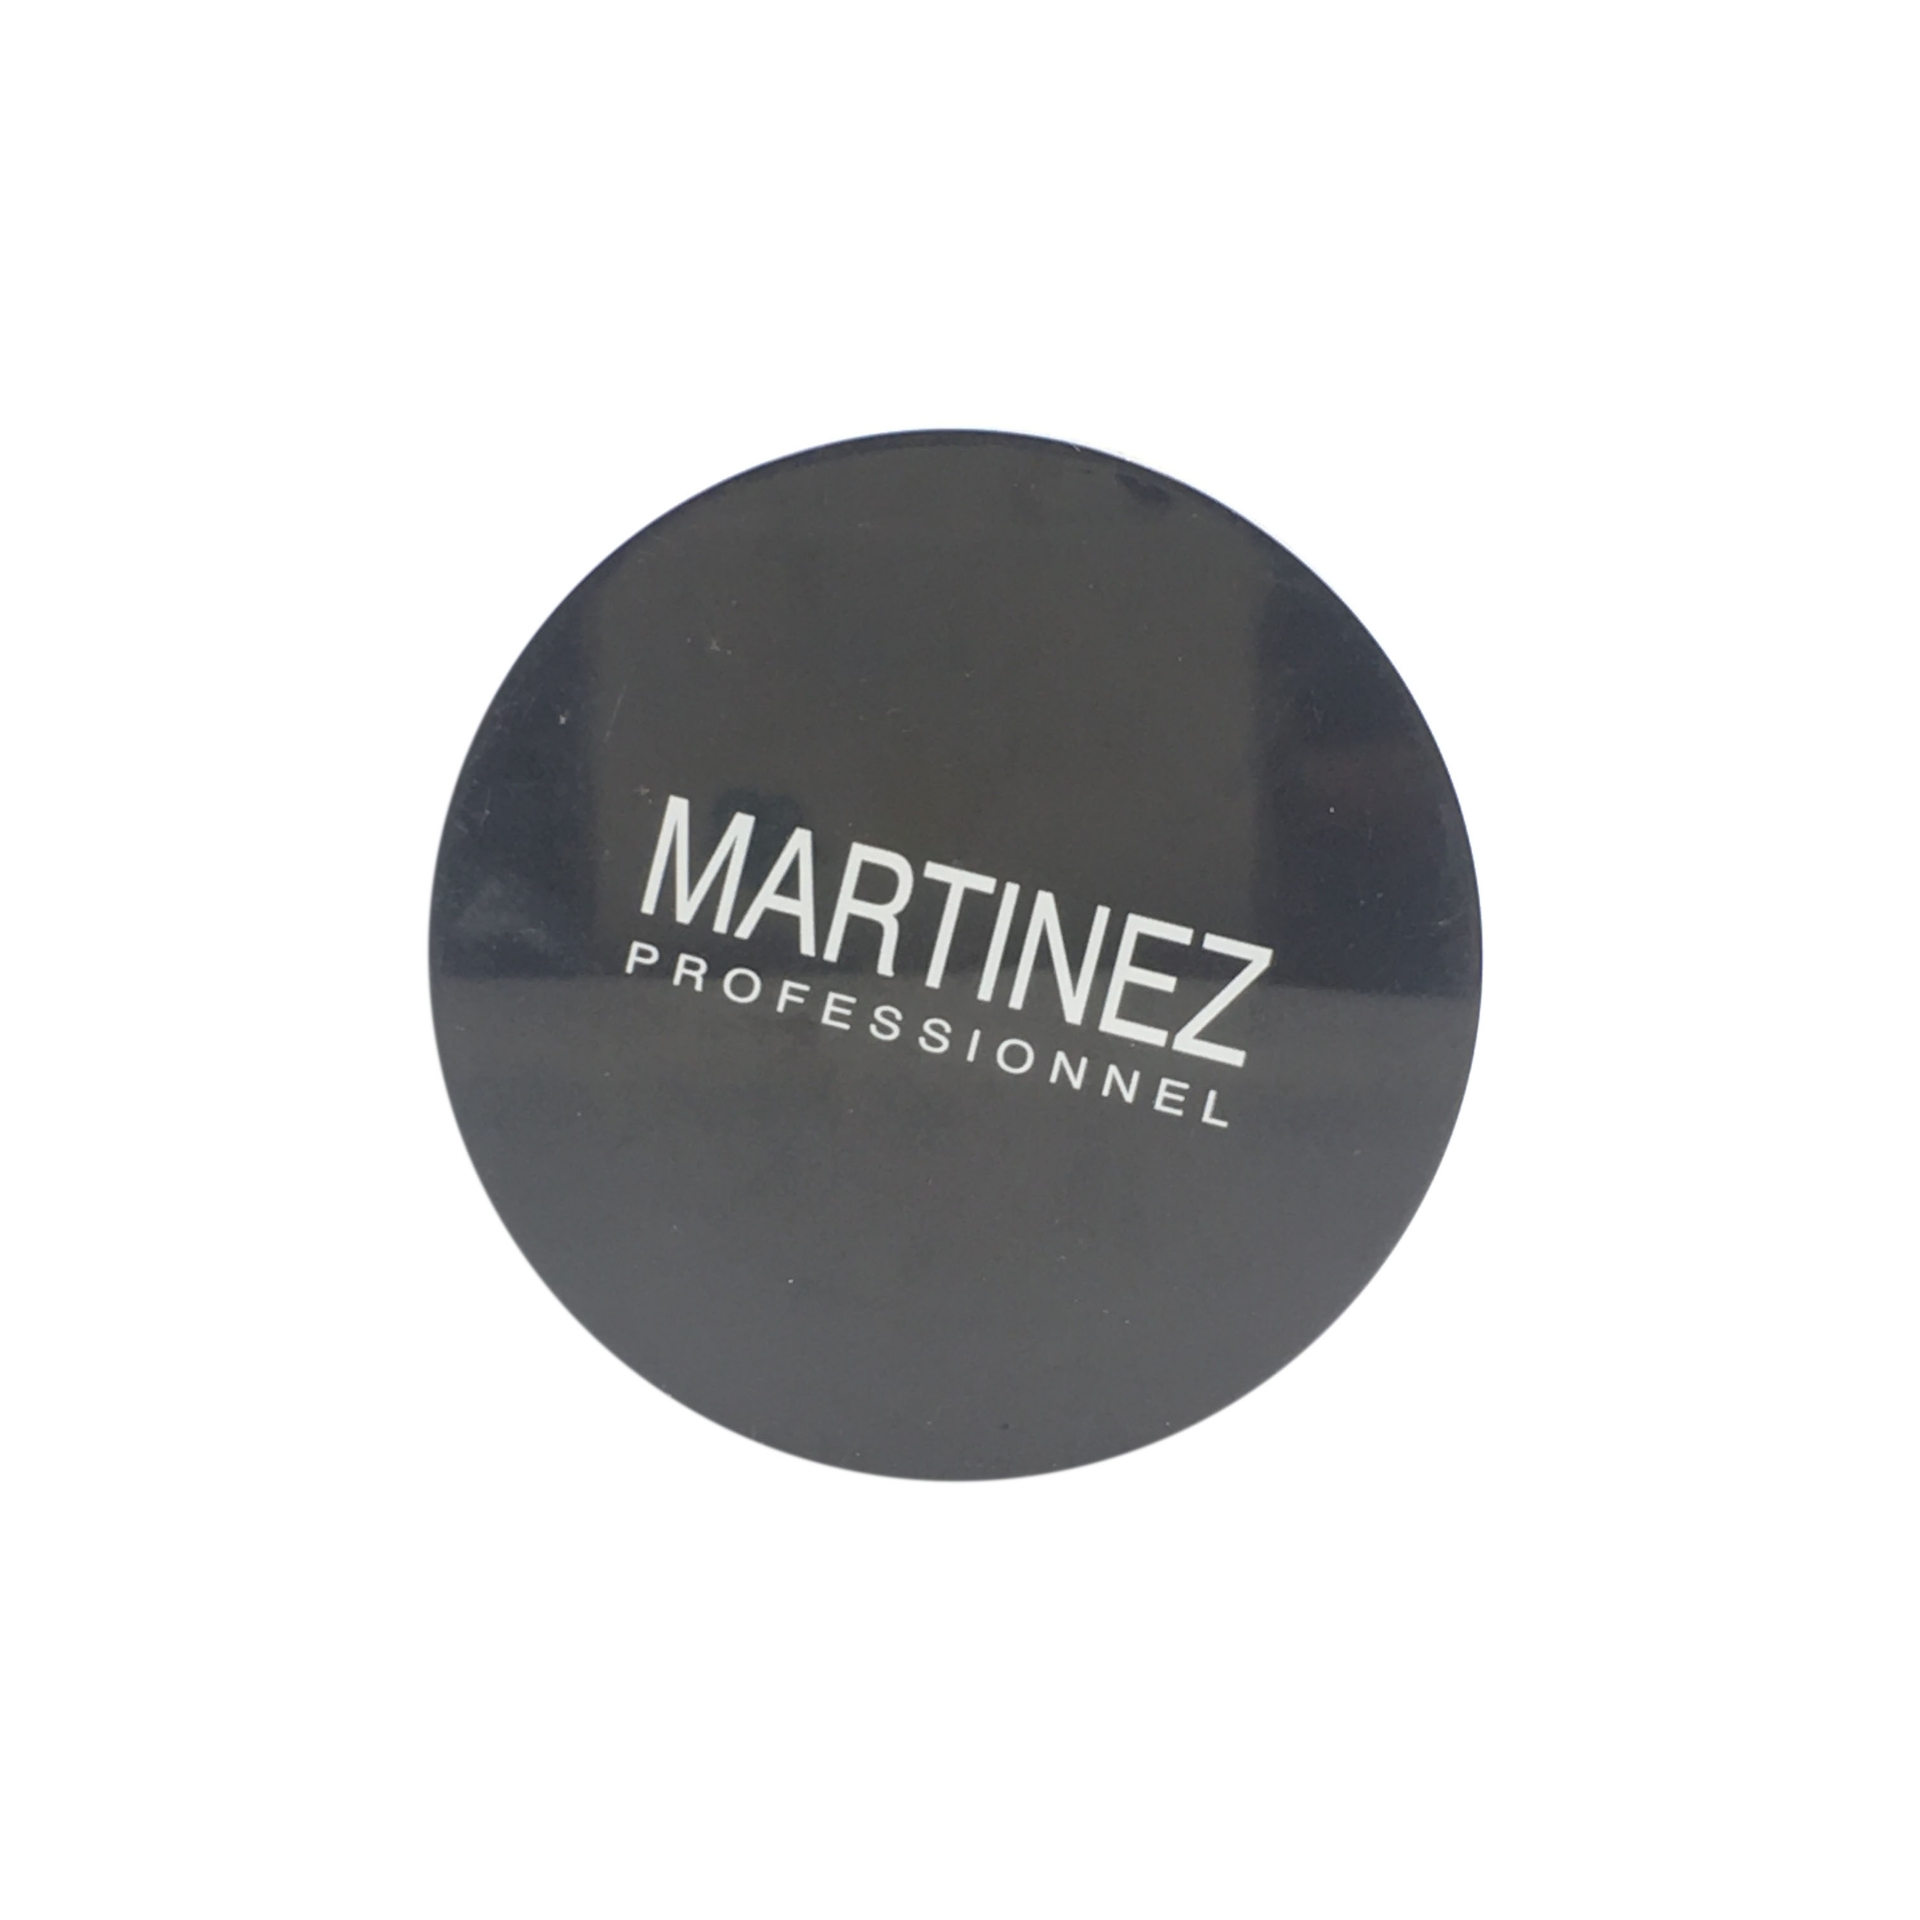 Private Collection Martinez Professionel High Perfomance Dramatic Glow Loose Powder 01 Natural Fair Faces